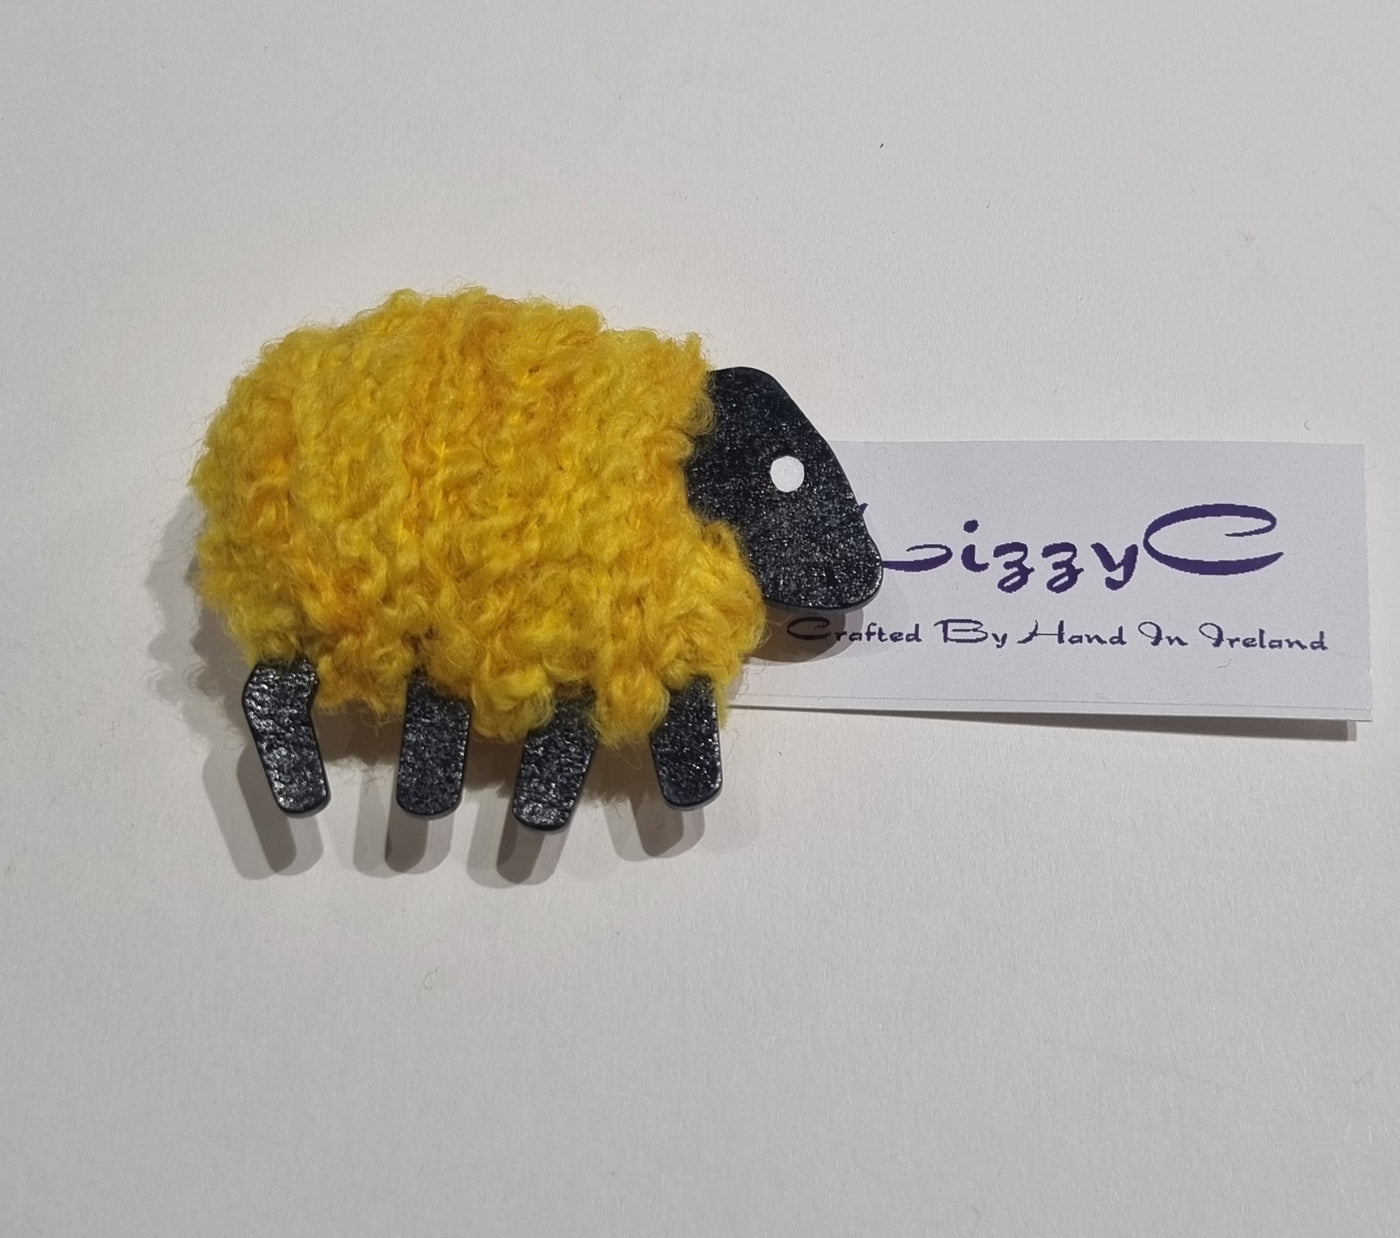 Lizzy C Sheep Magnets